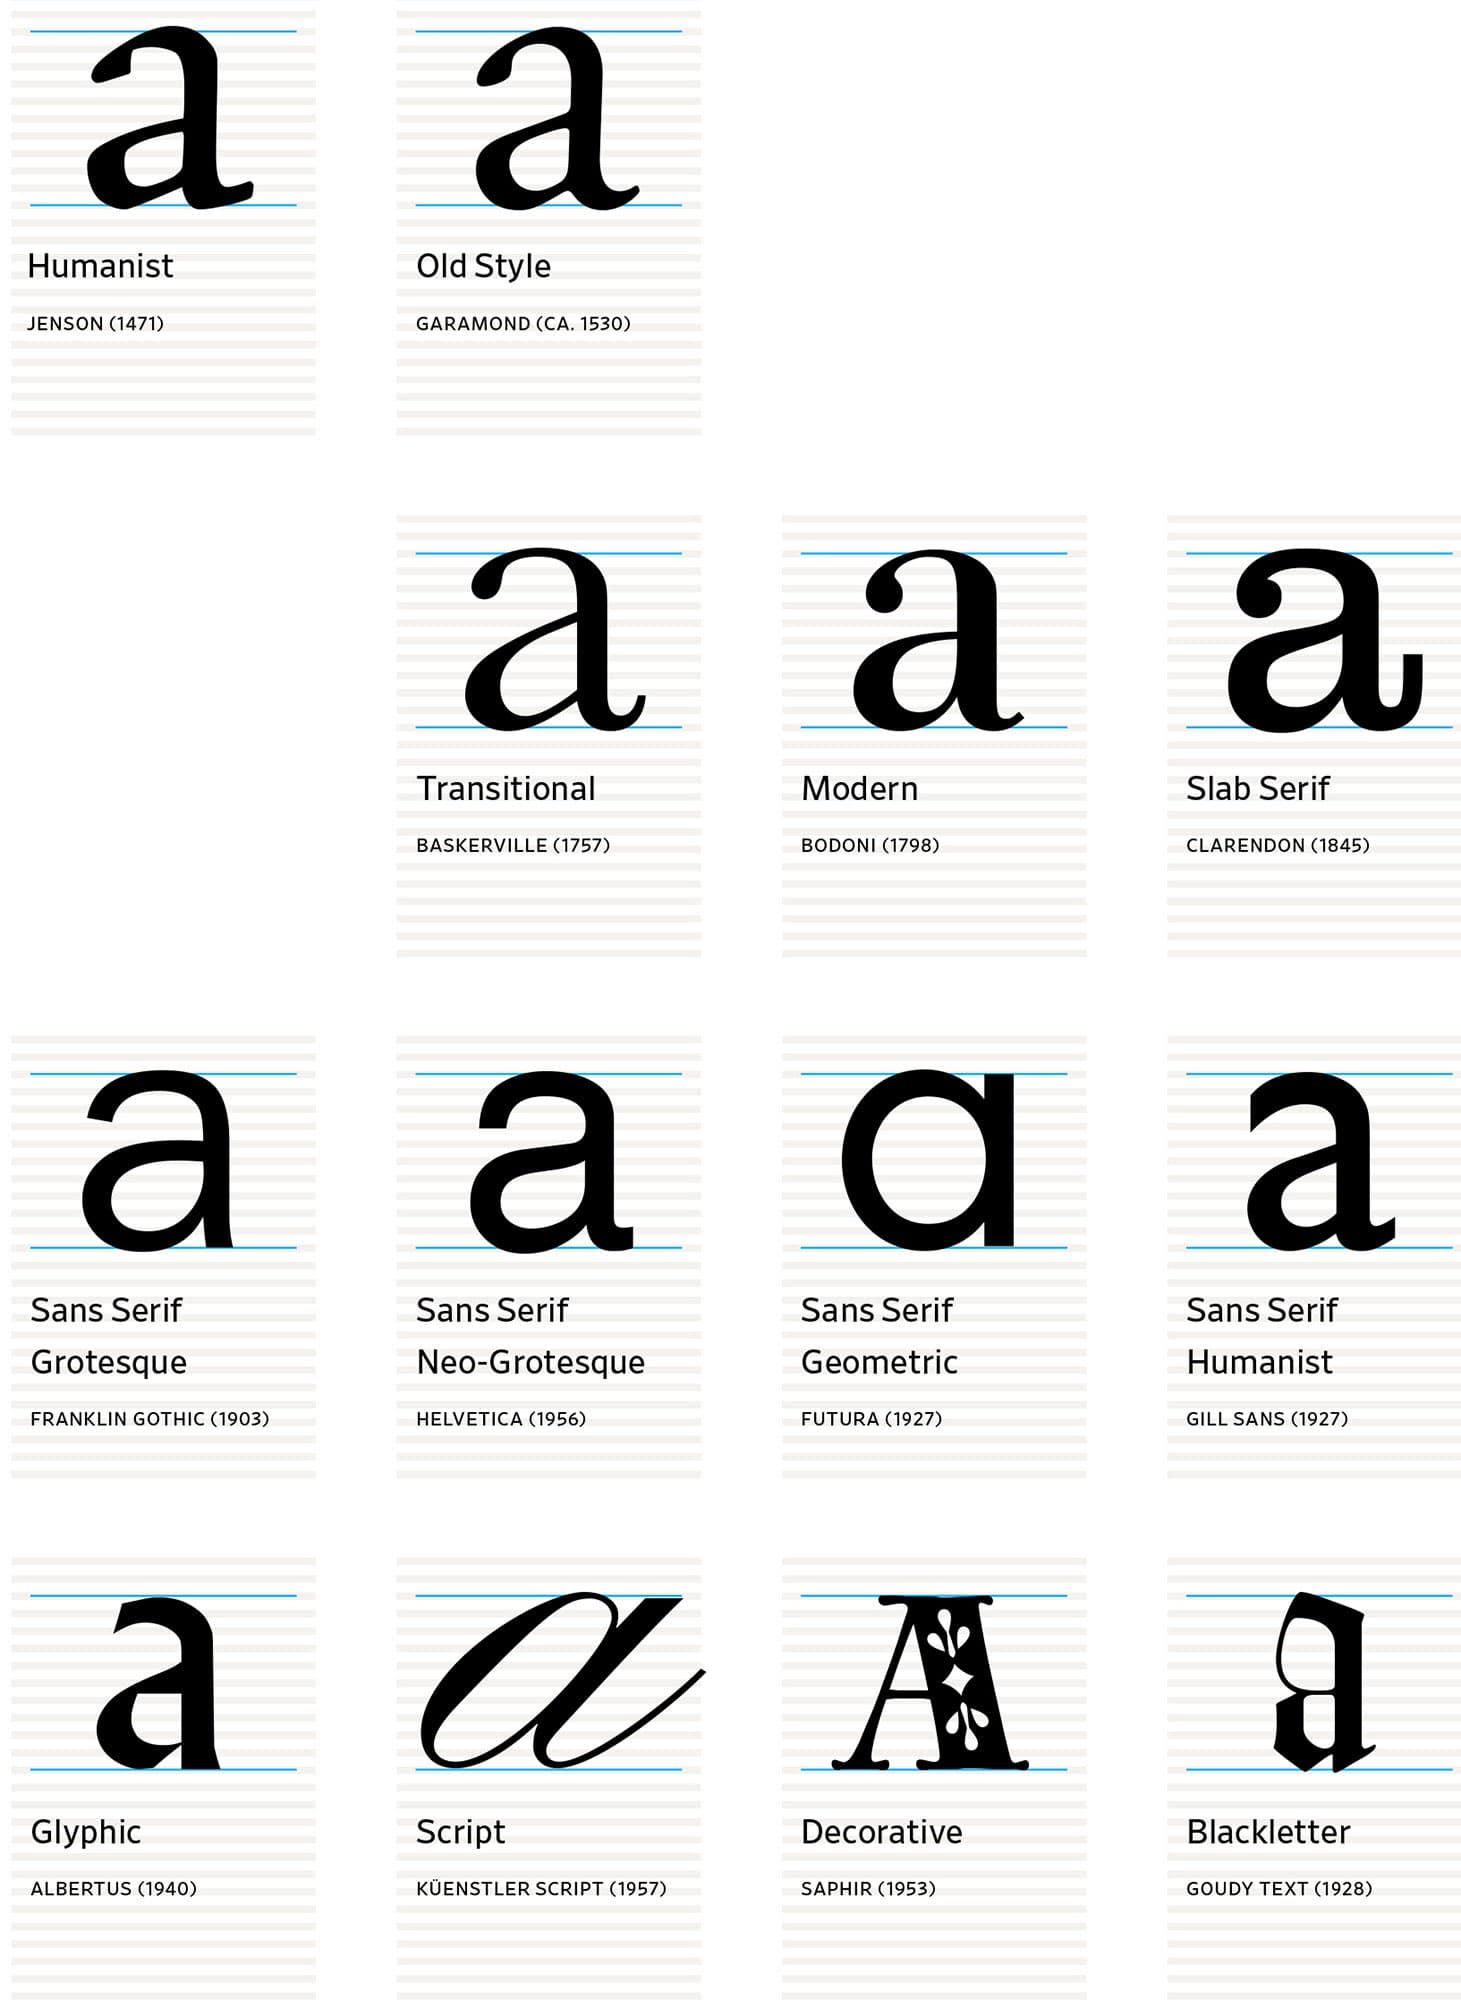 A basic system for classifying typefaces was also devised in the nineteenth - photo 5